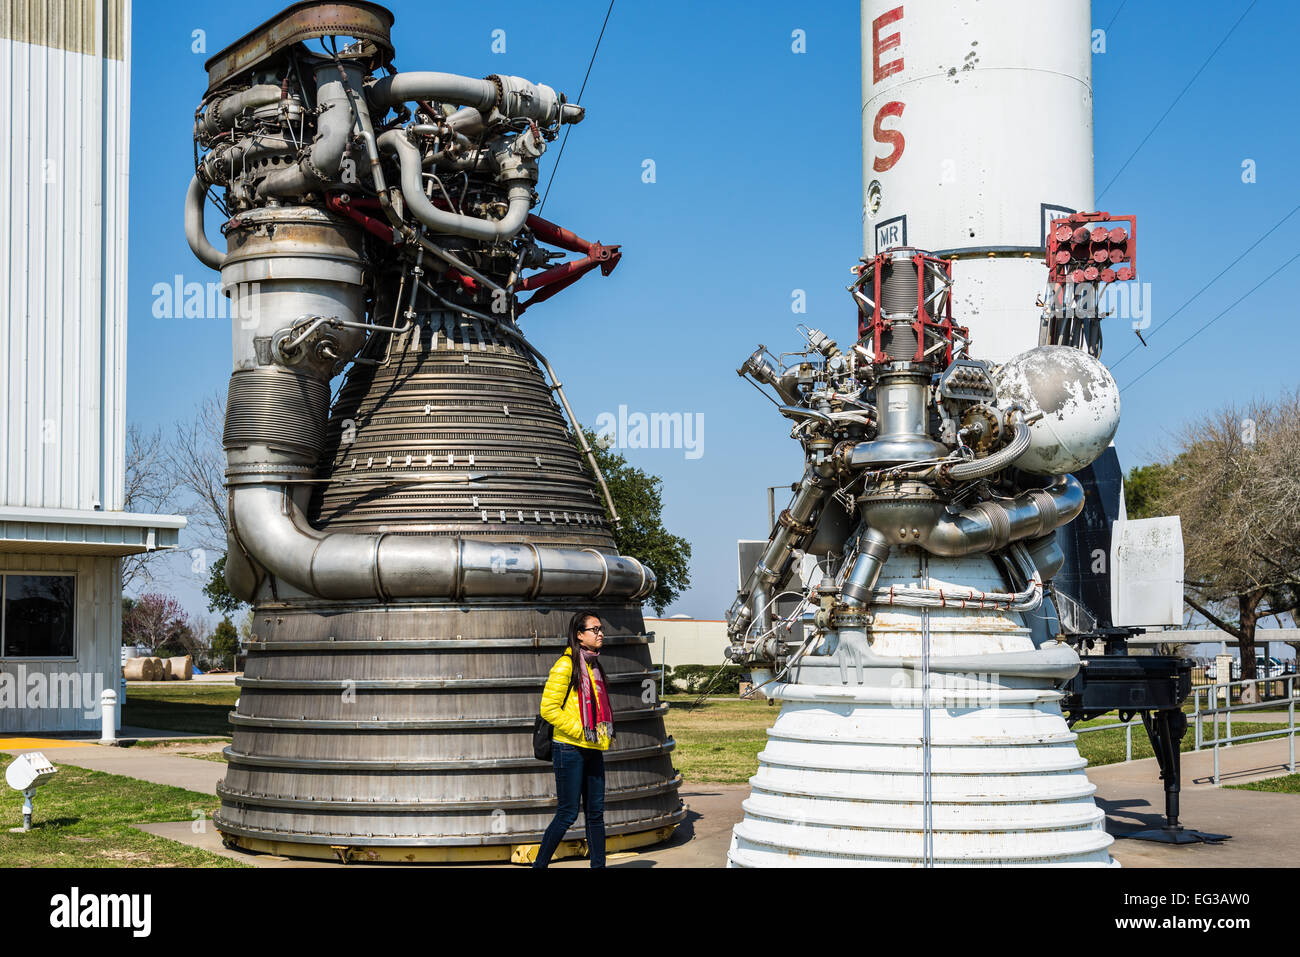 A female tourist walks in front of giant rocket engines at the Rocket Park, NASA Johnson Space Center, Houston, Texas, USA. Stock Photo